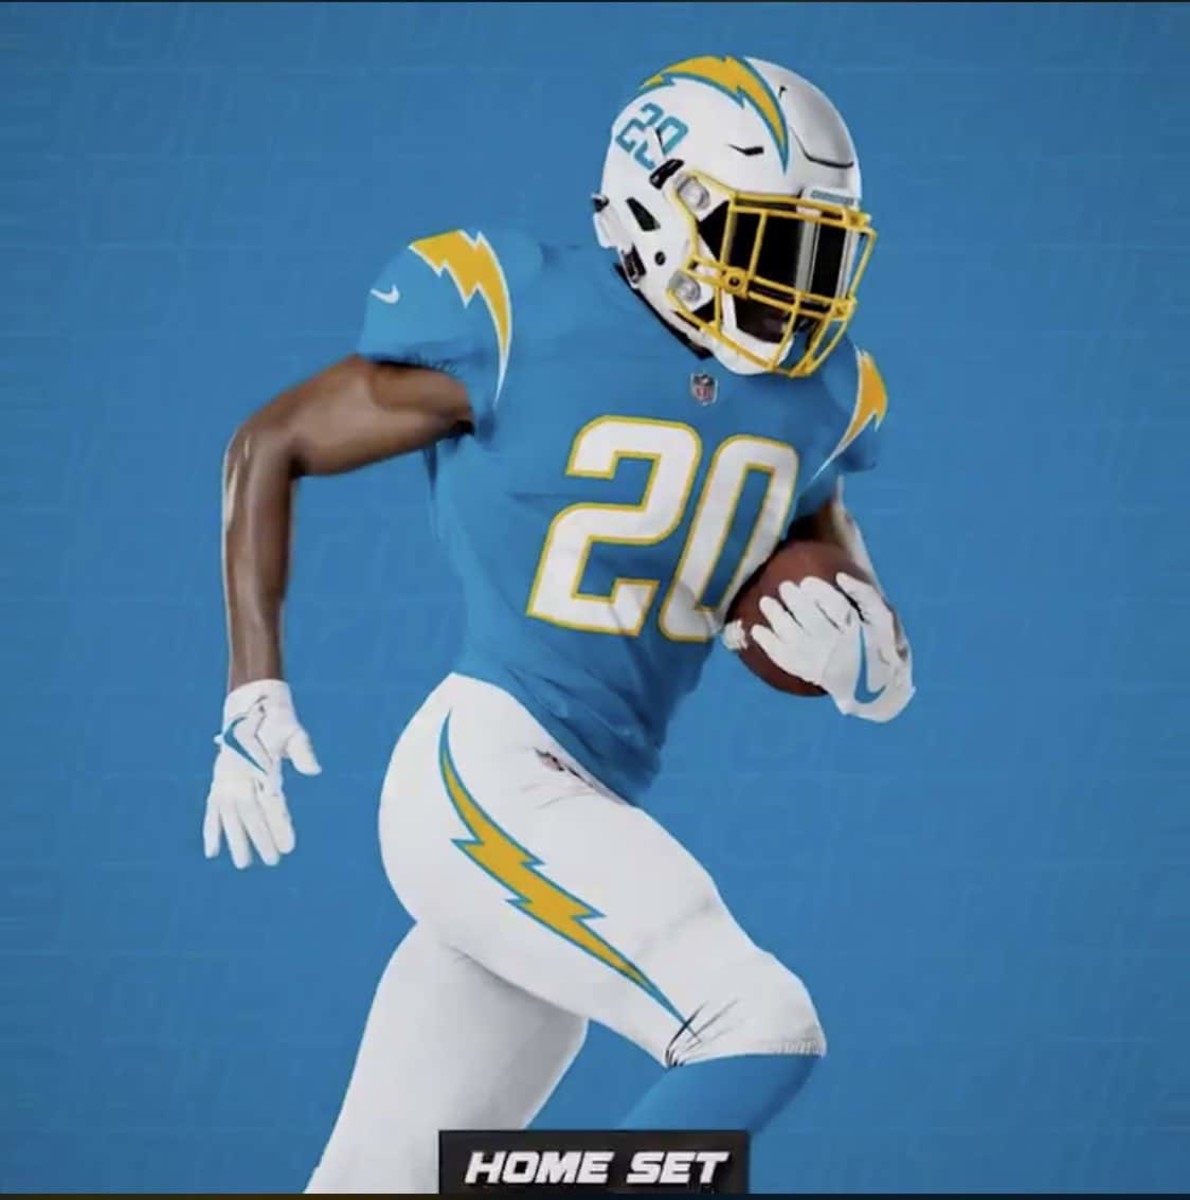 chargers new uniforms 2022